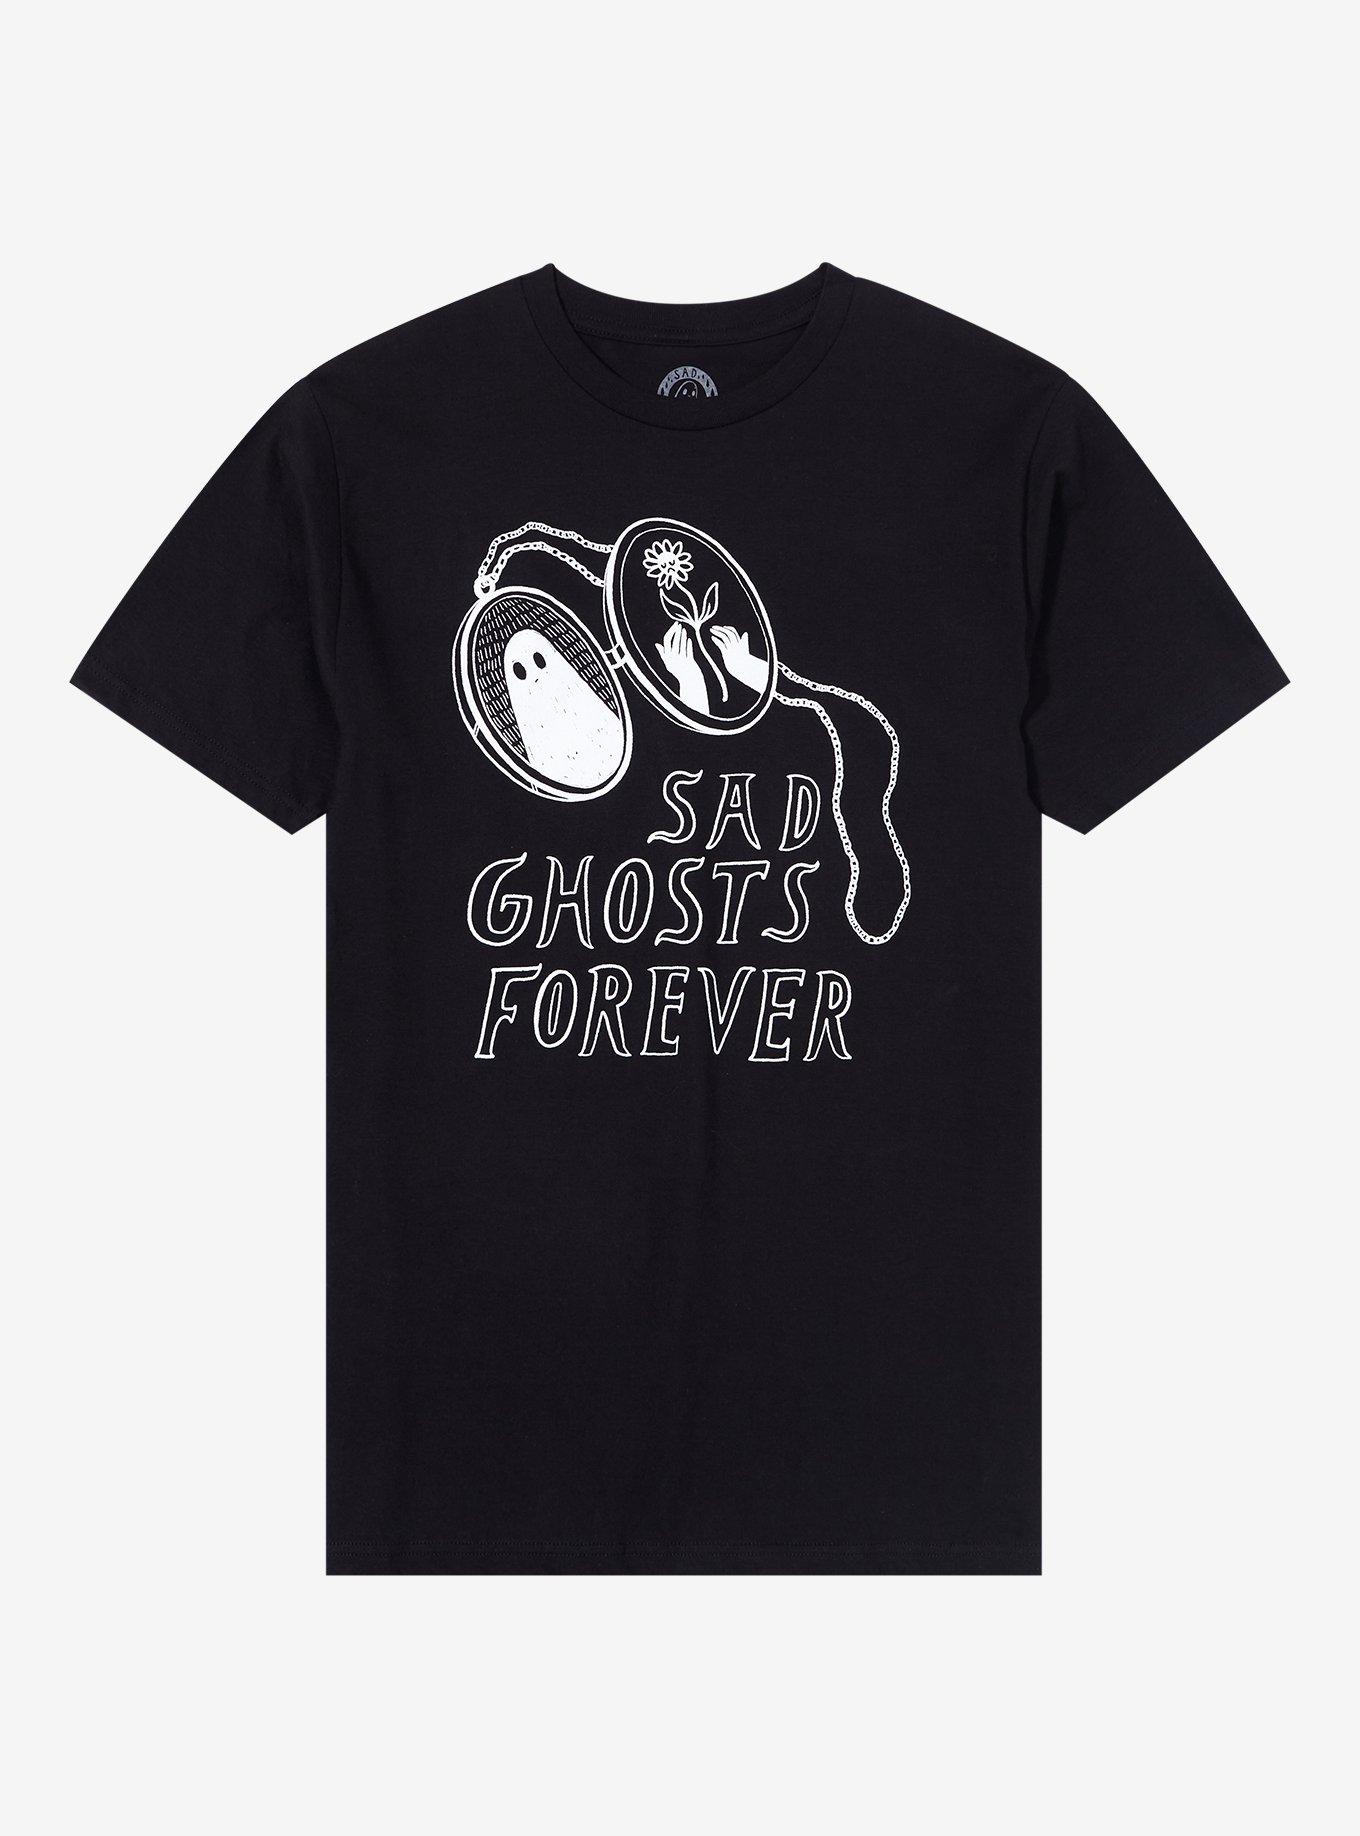 Sad Ghosts Forever T-Shirt By The Ghost Club